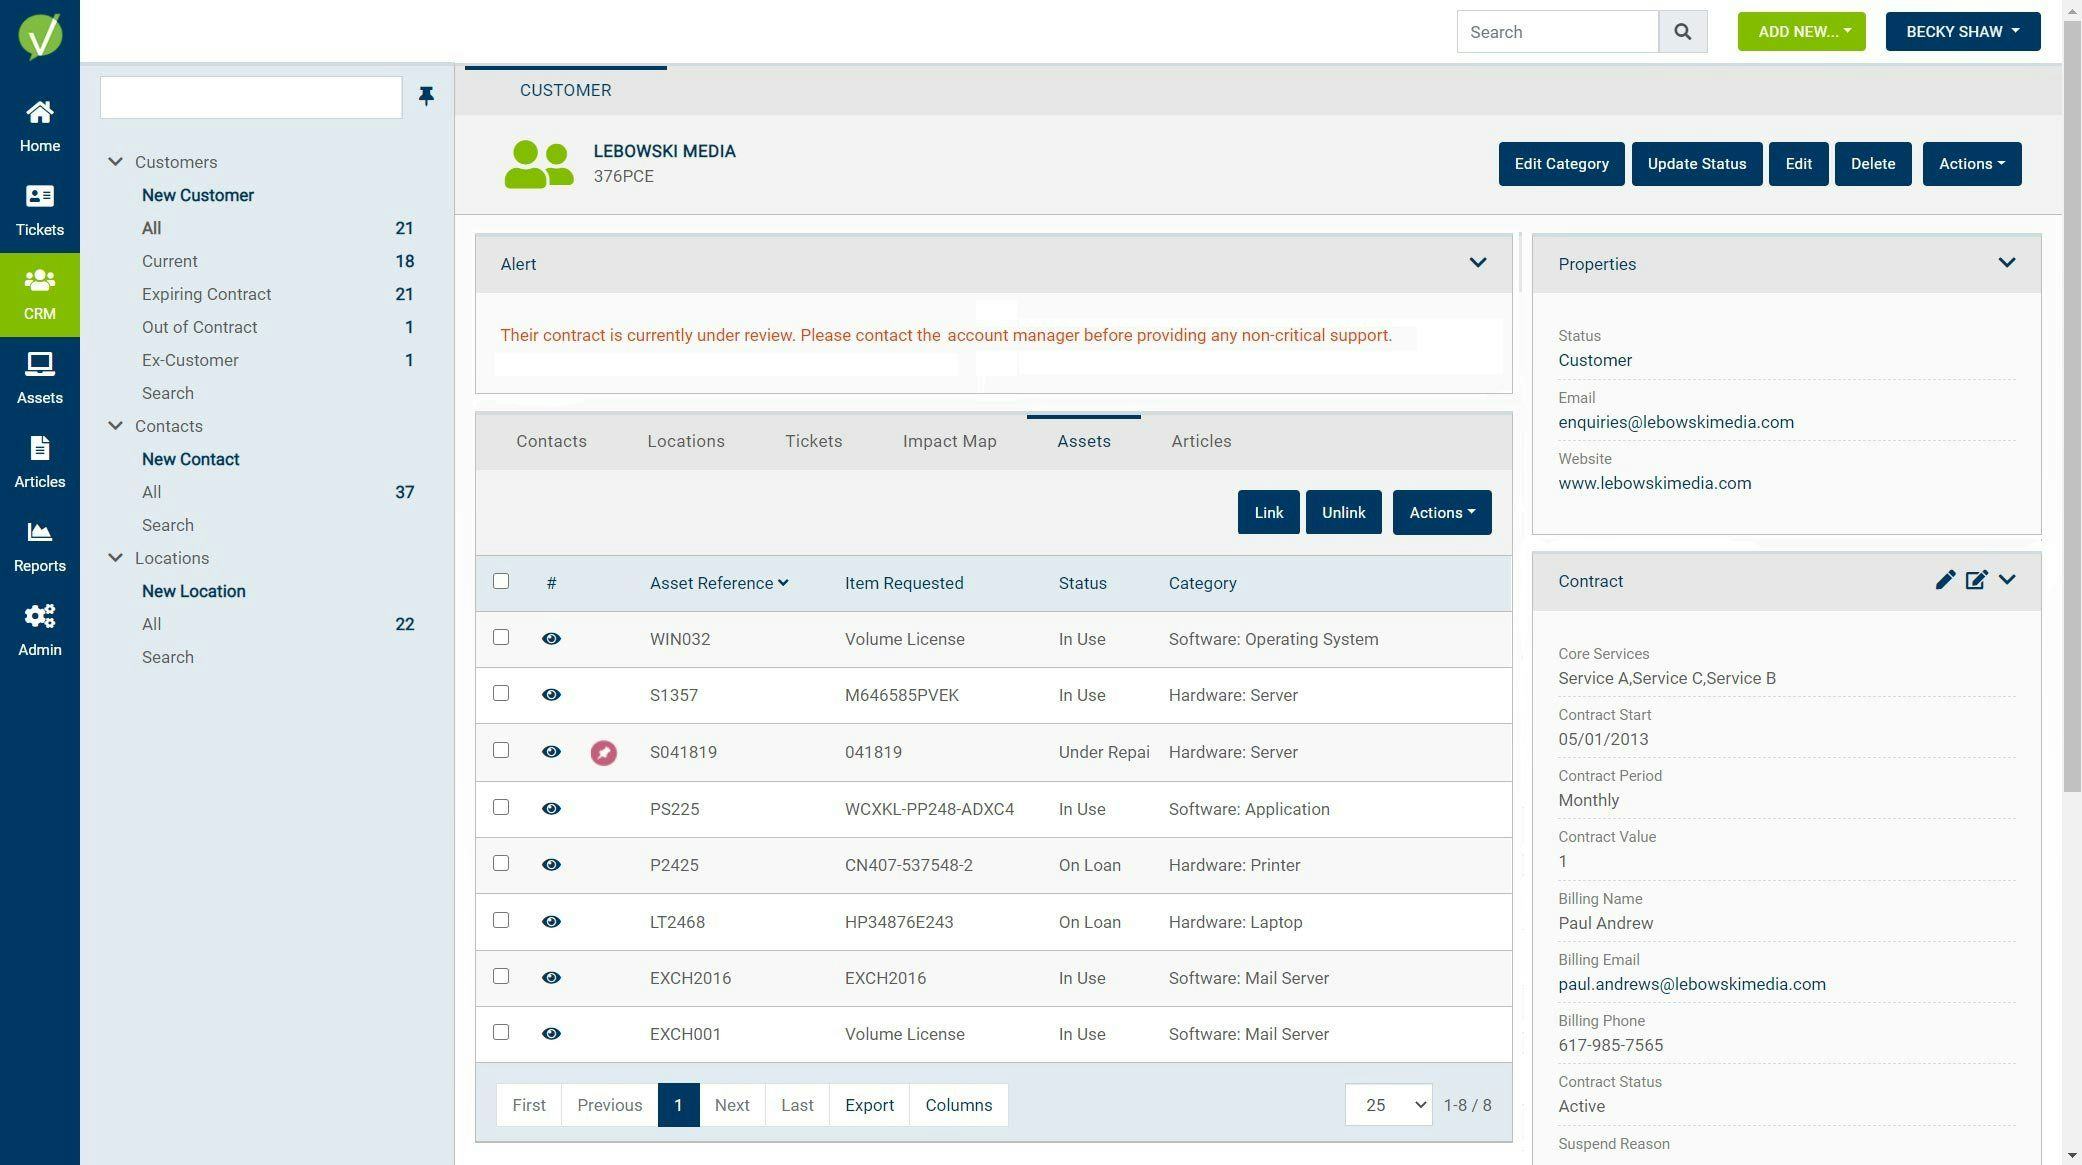 Vivantio Software - CRM Management (For Customer Service Teams). For other internal service teams, this can be disabled.